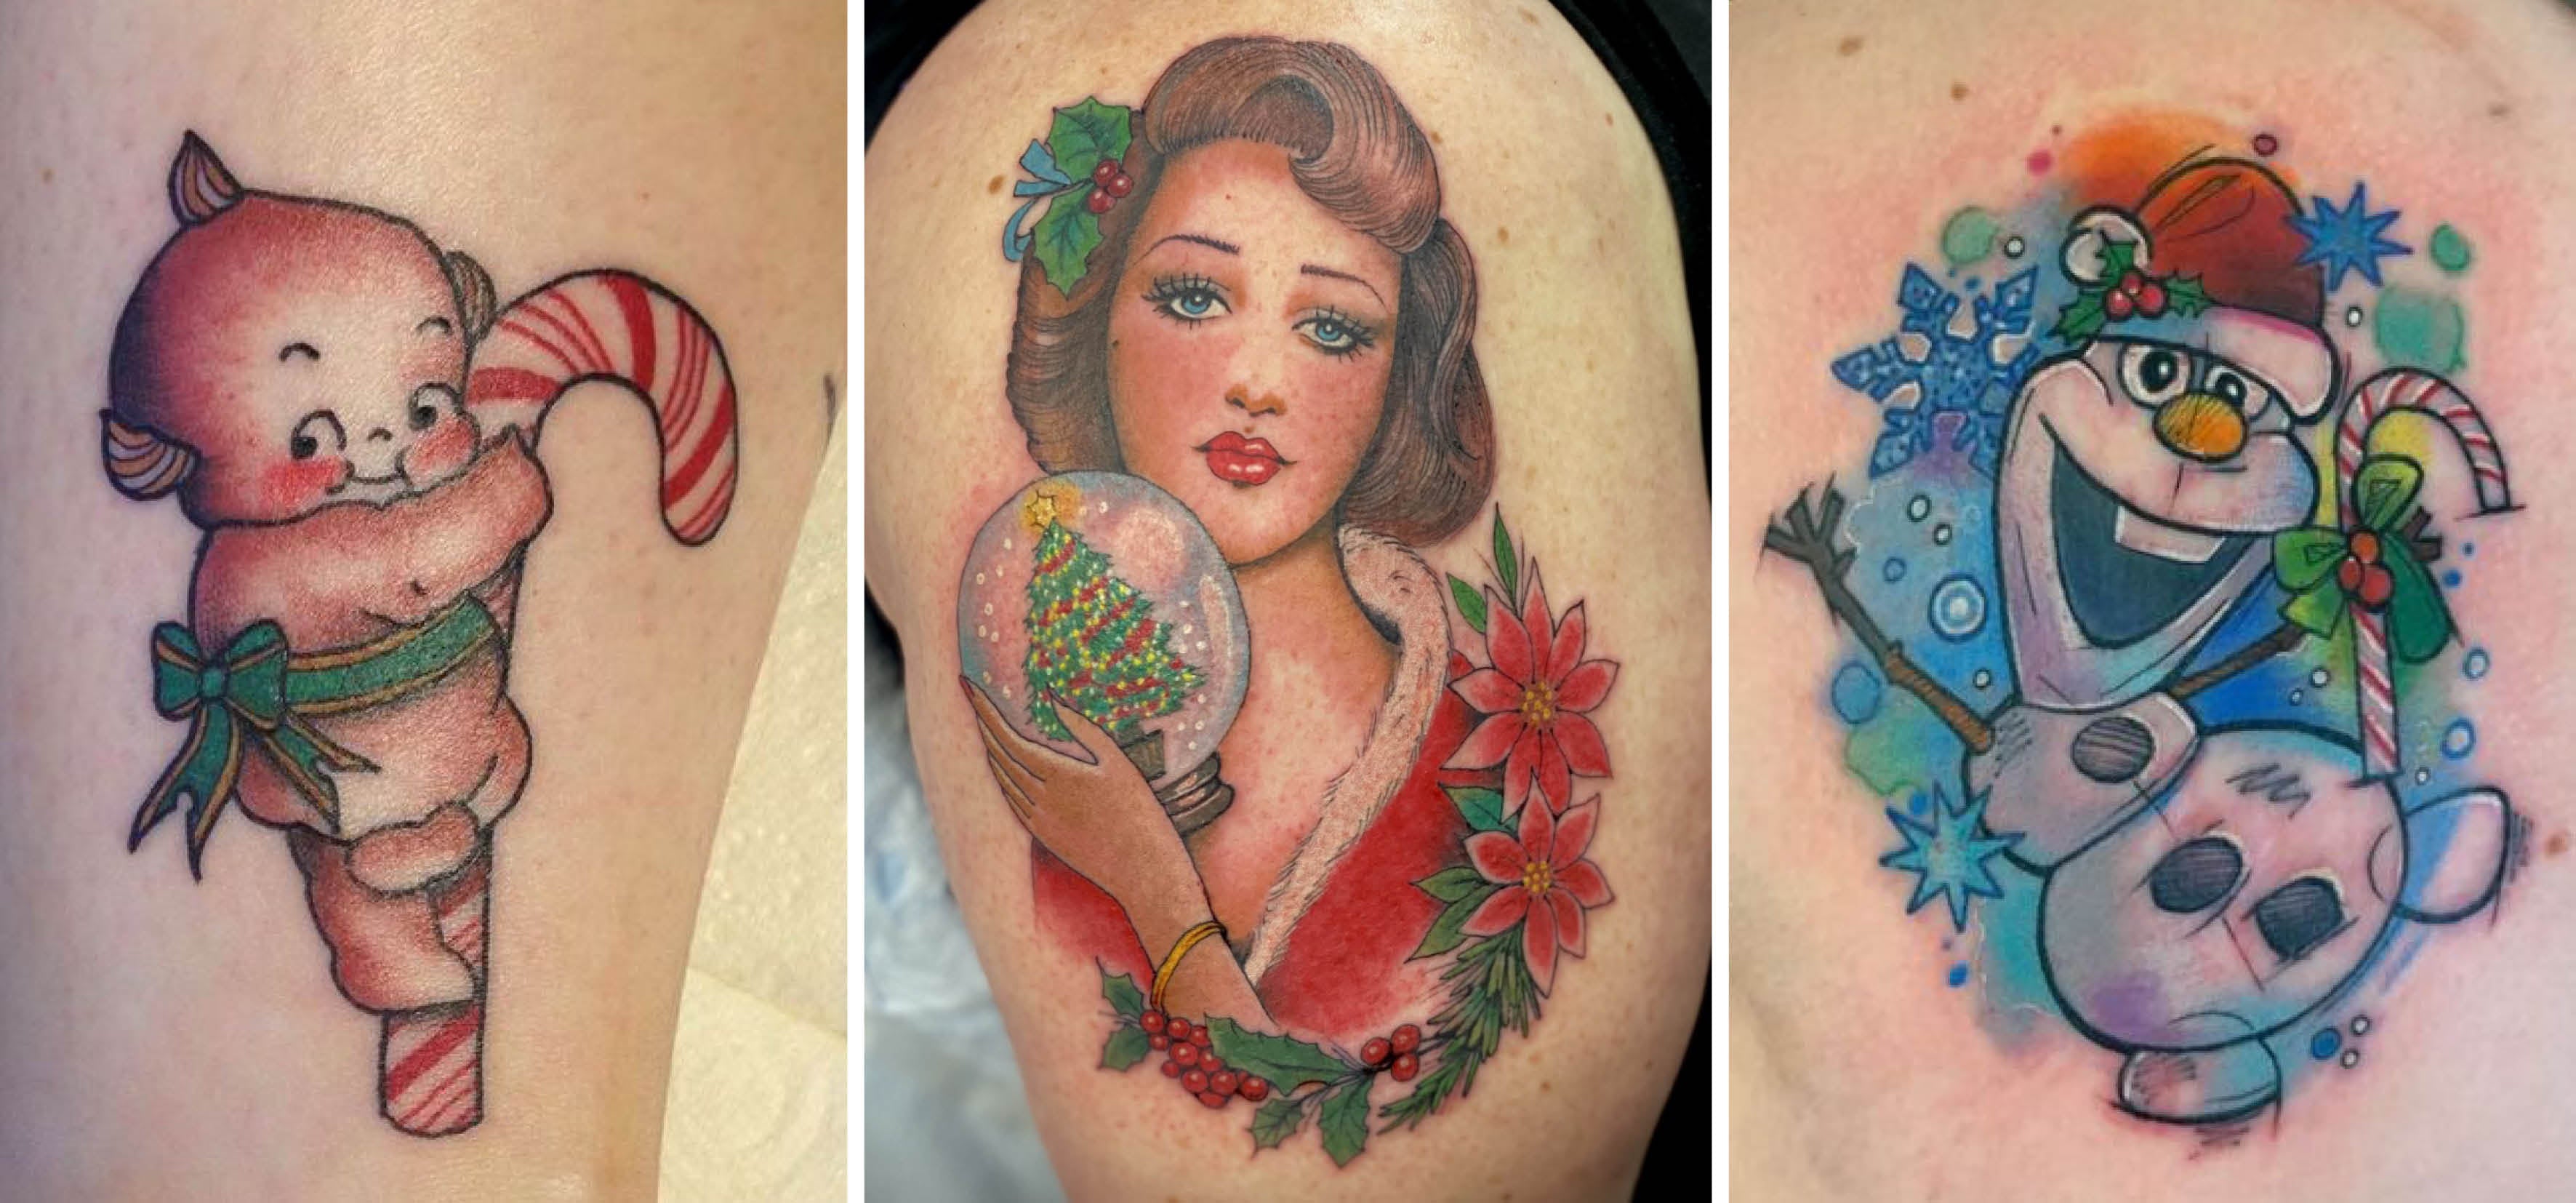 Feeling Festive: The Best Christmas Tattoos Around – Stories and Ink